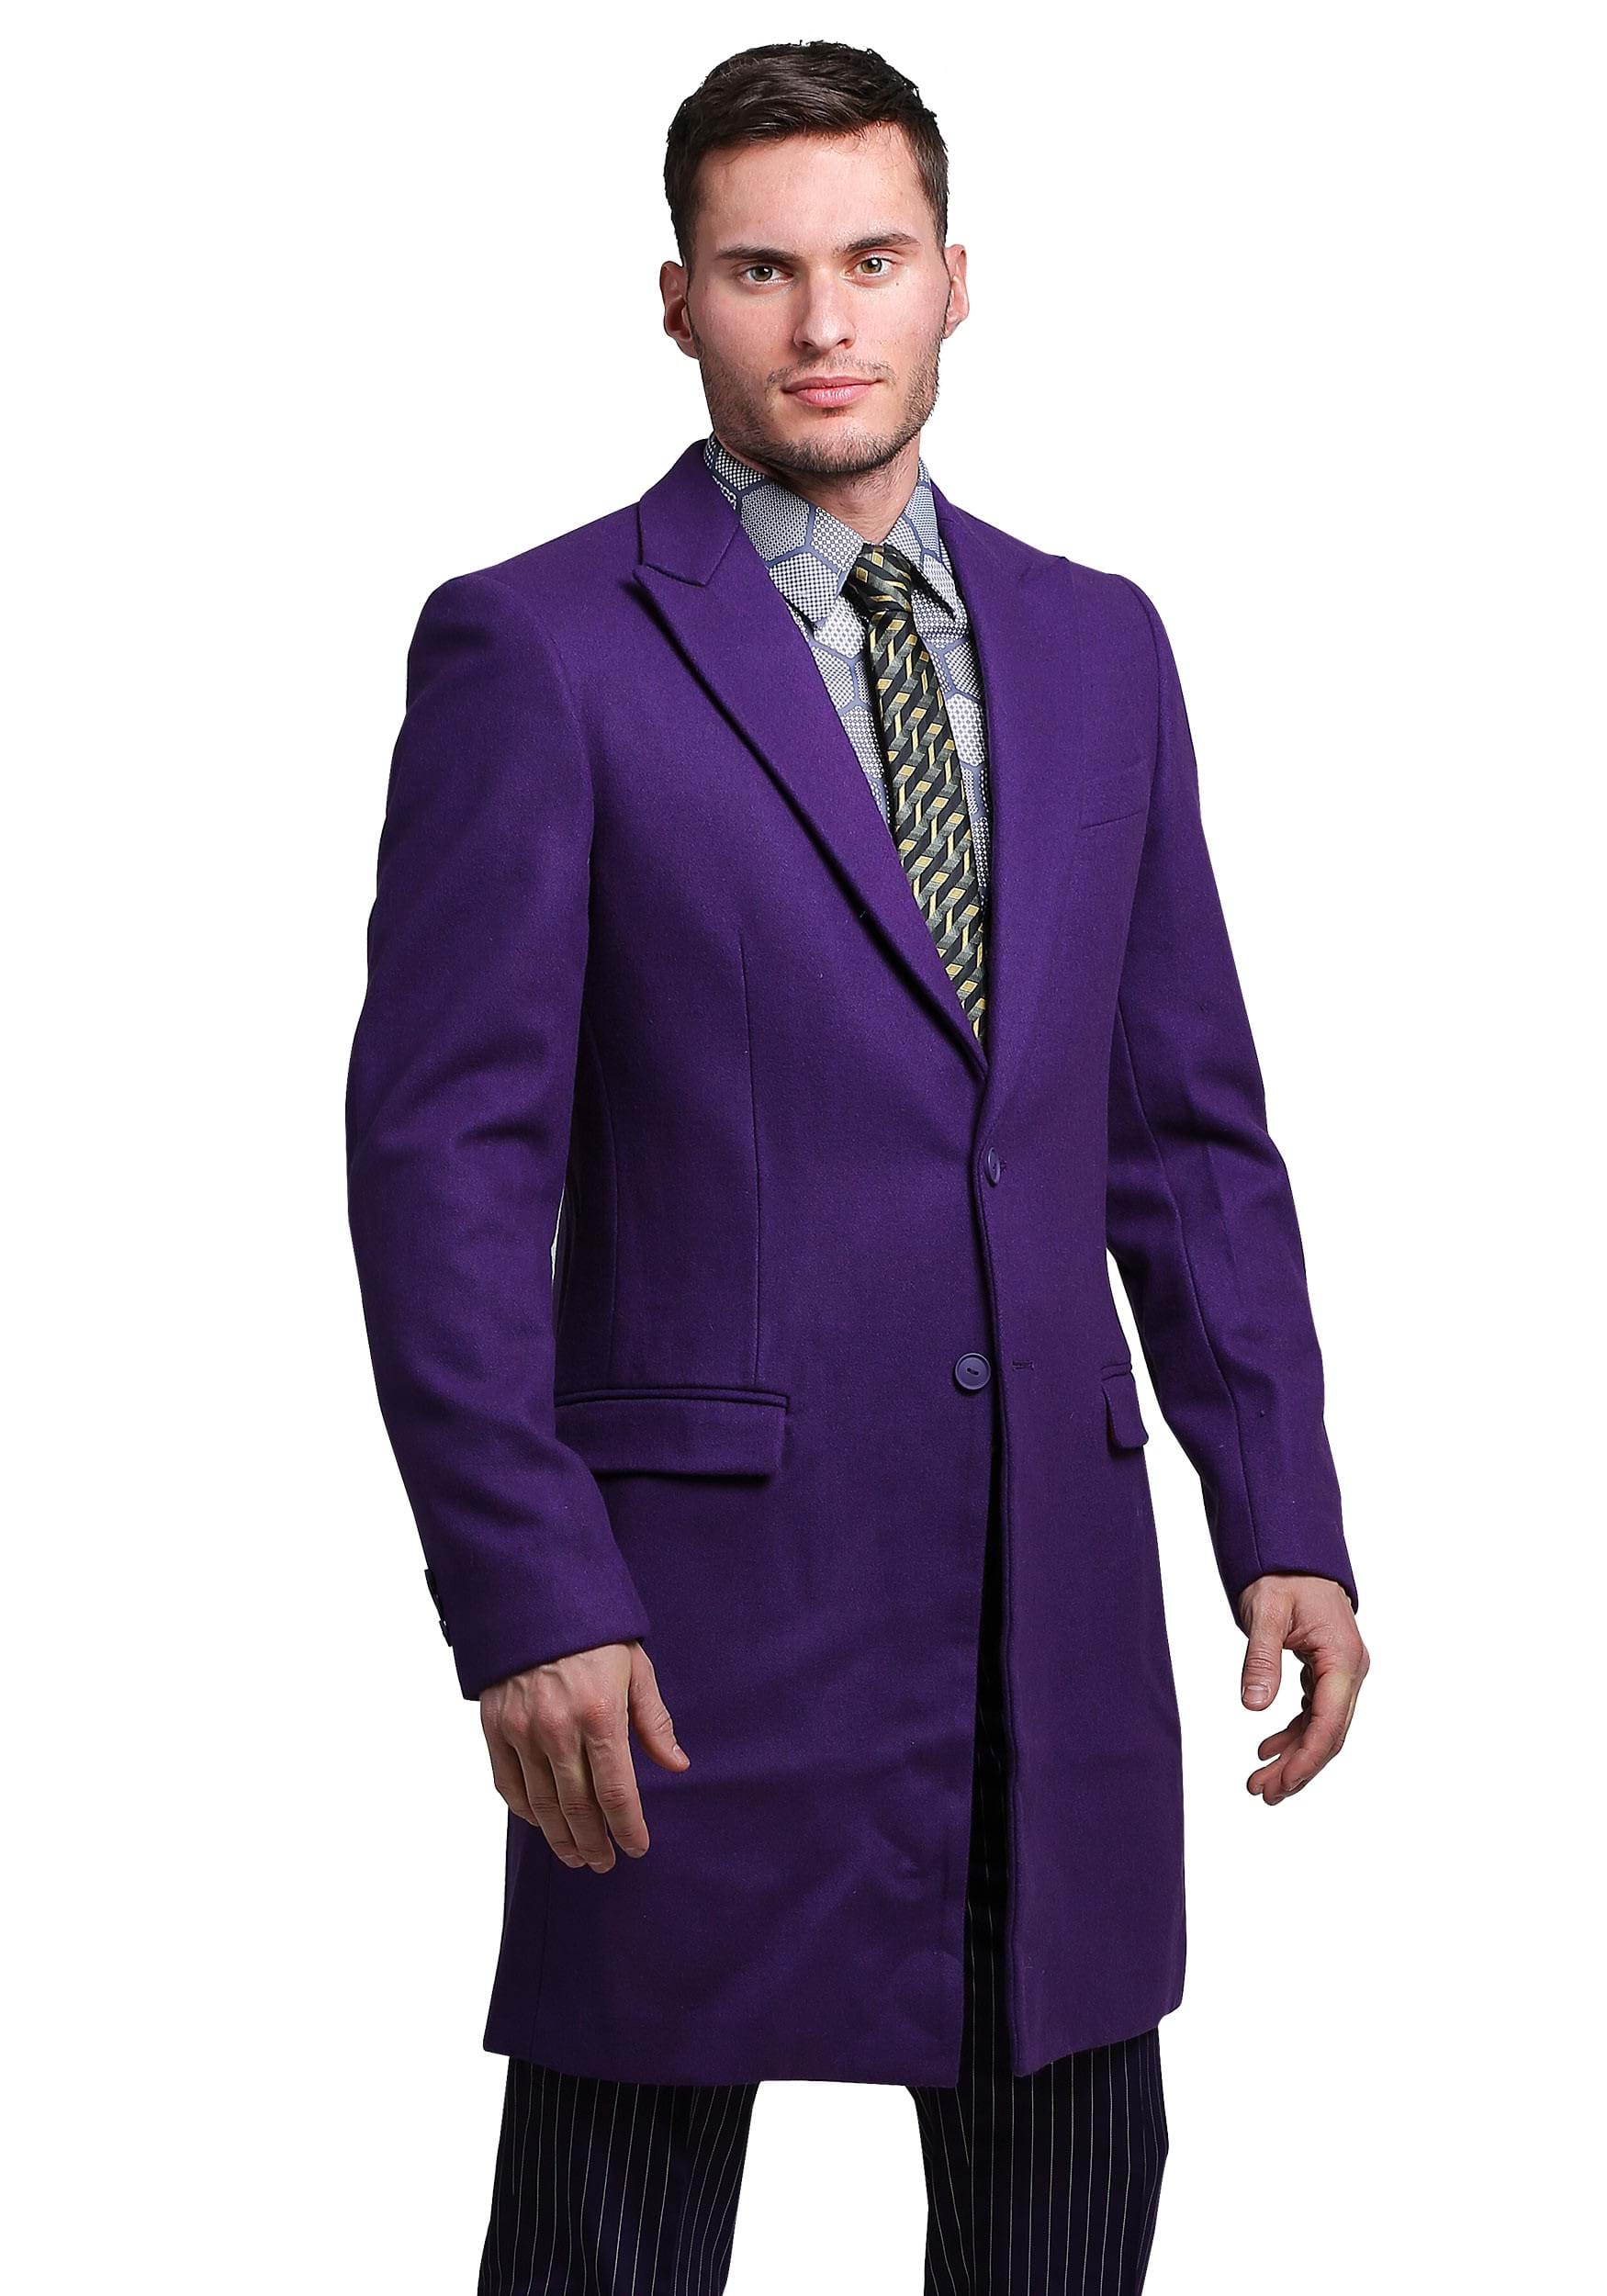 Image of THE JOKER Slim Fit Suit Overcoat (Authentic) ID FUN9011O-48